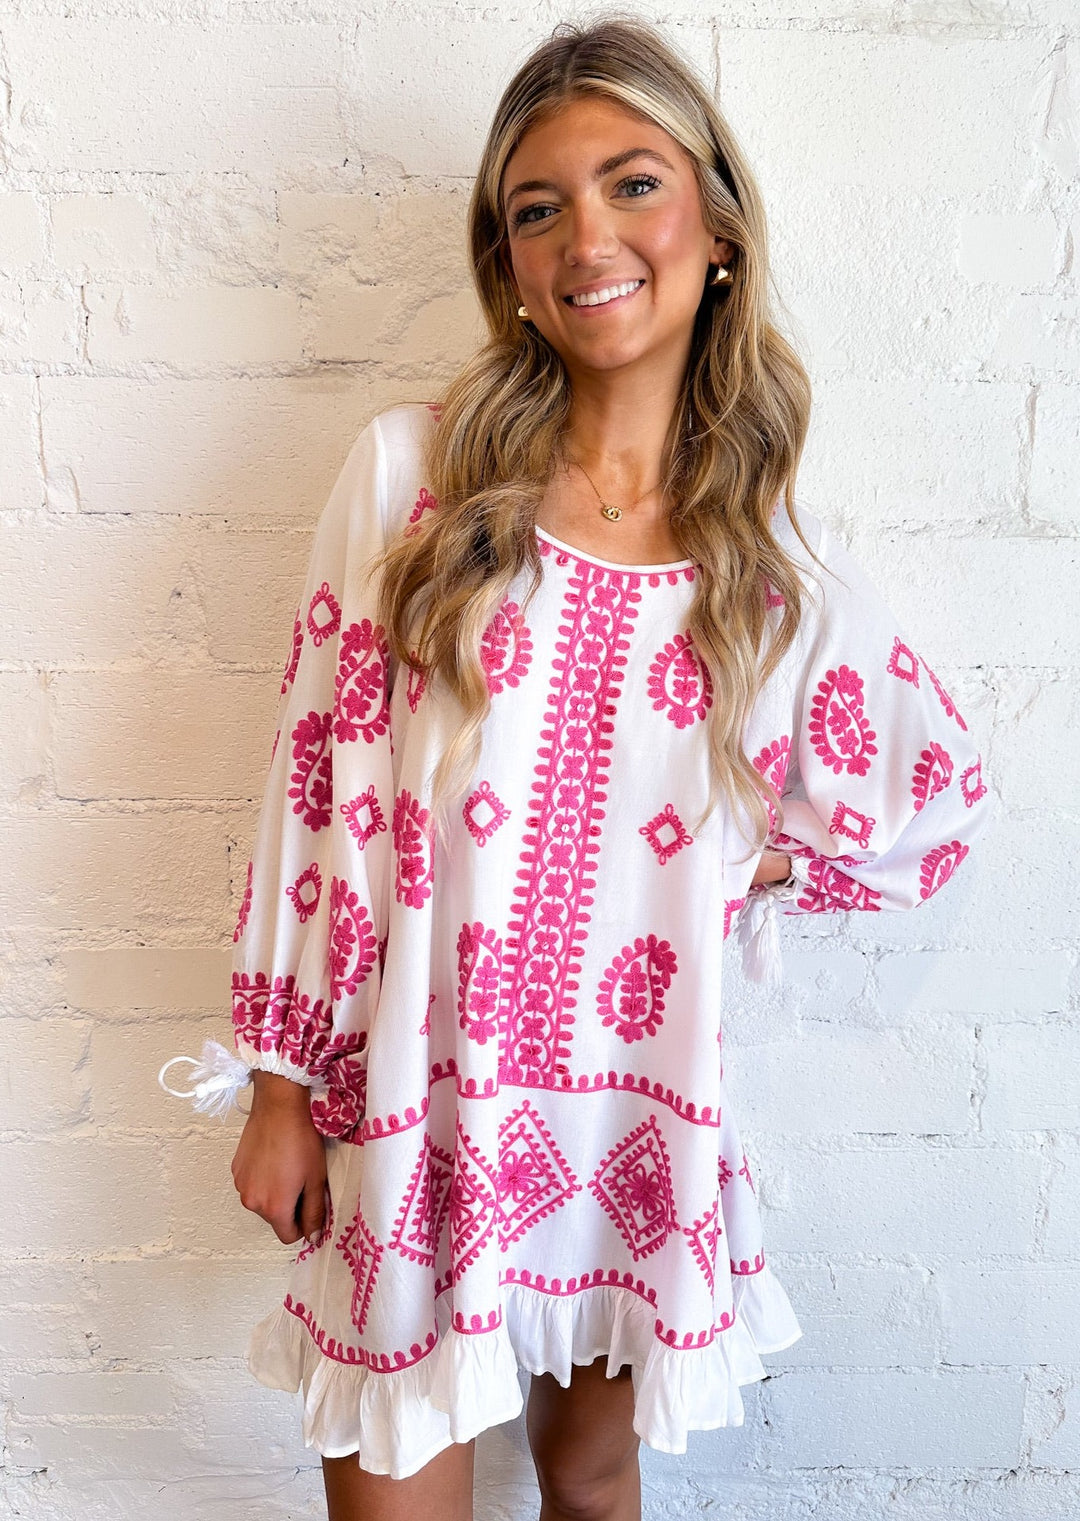 Cabana Cover Up, Tops, Adeline, Adeline, dallas boutique, dallas texas, texas boutique, women's boutique dallas, adeline boutique, dallas boutique, trendy boutique, affordable boutique